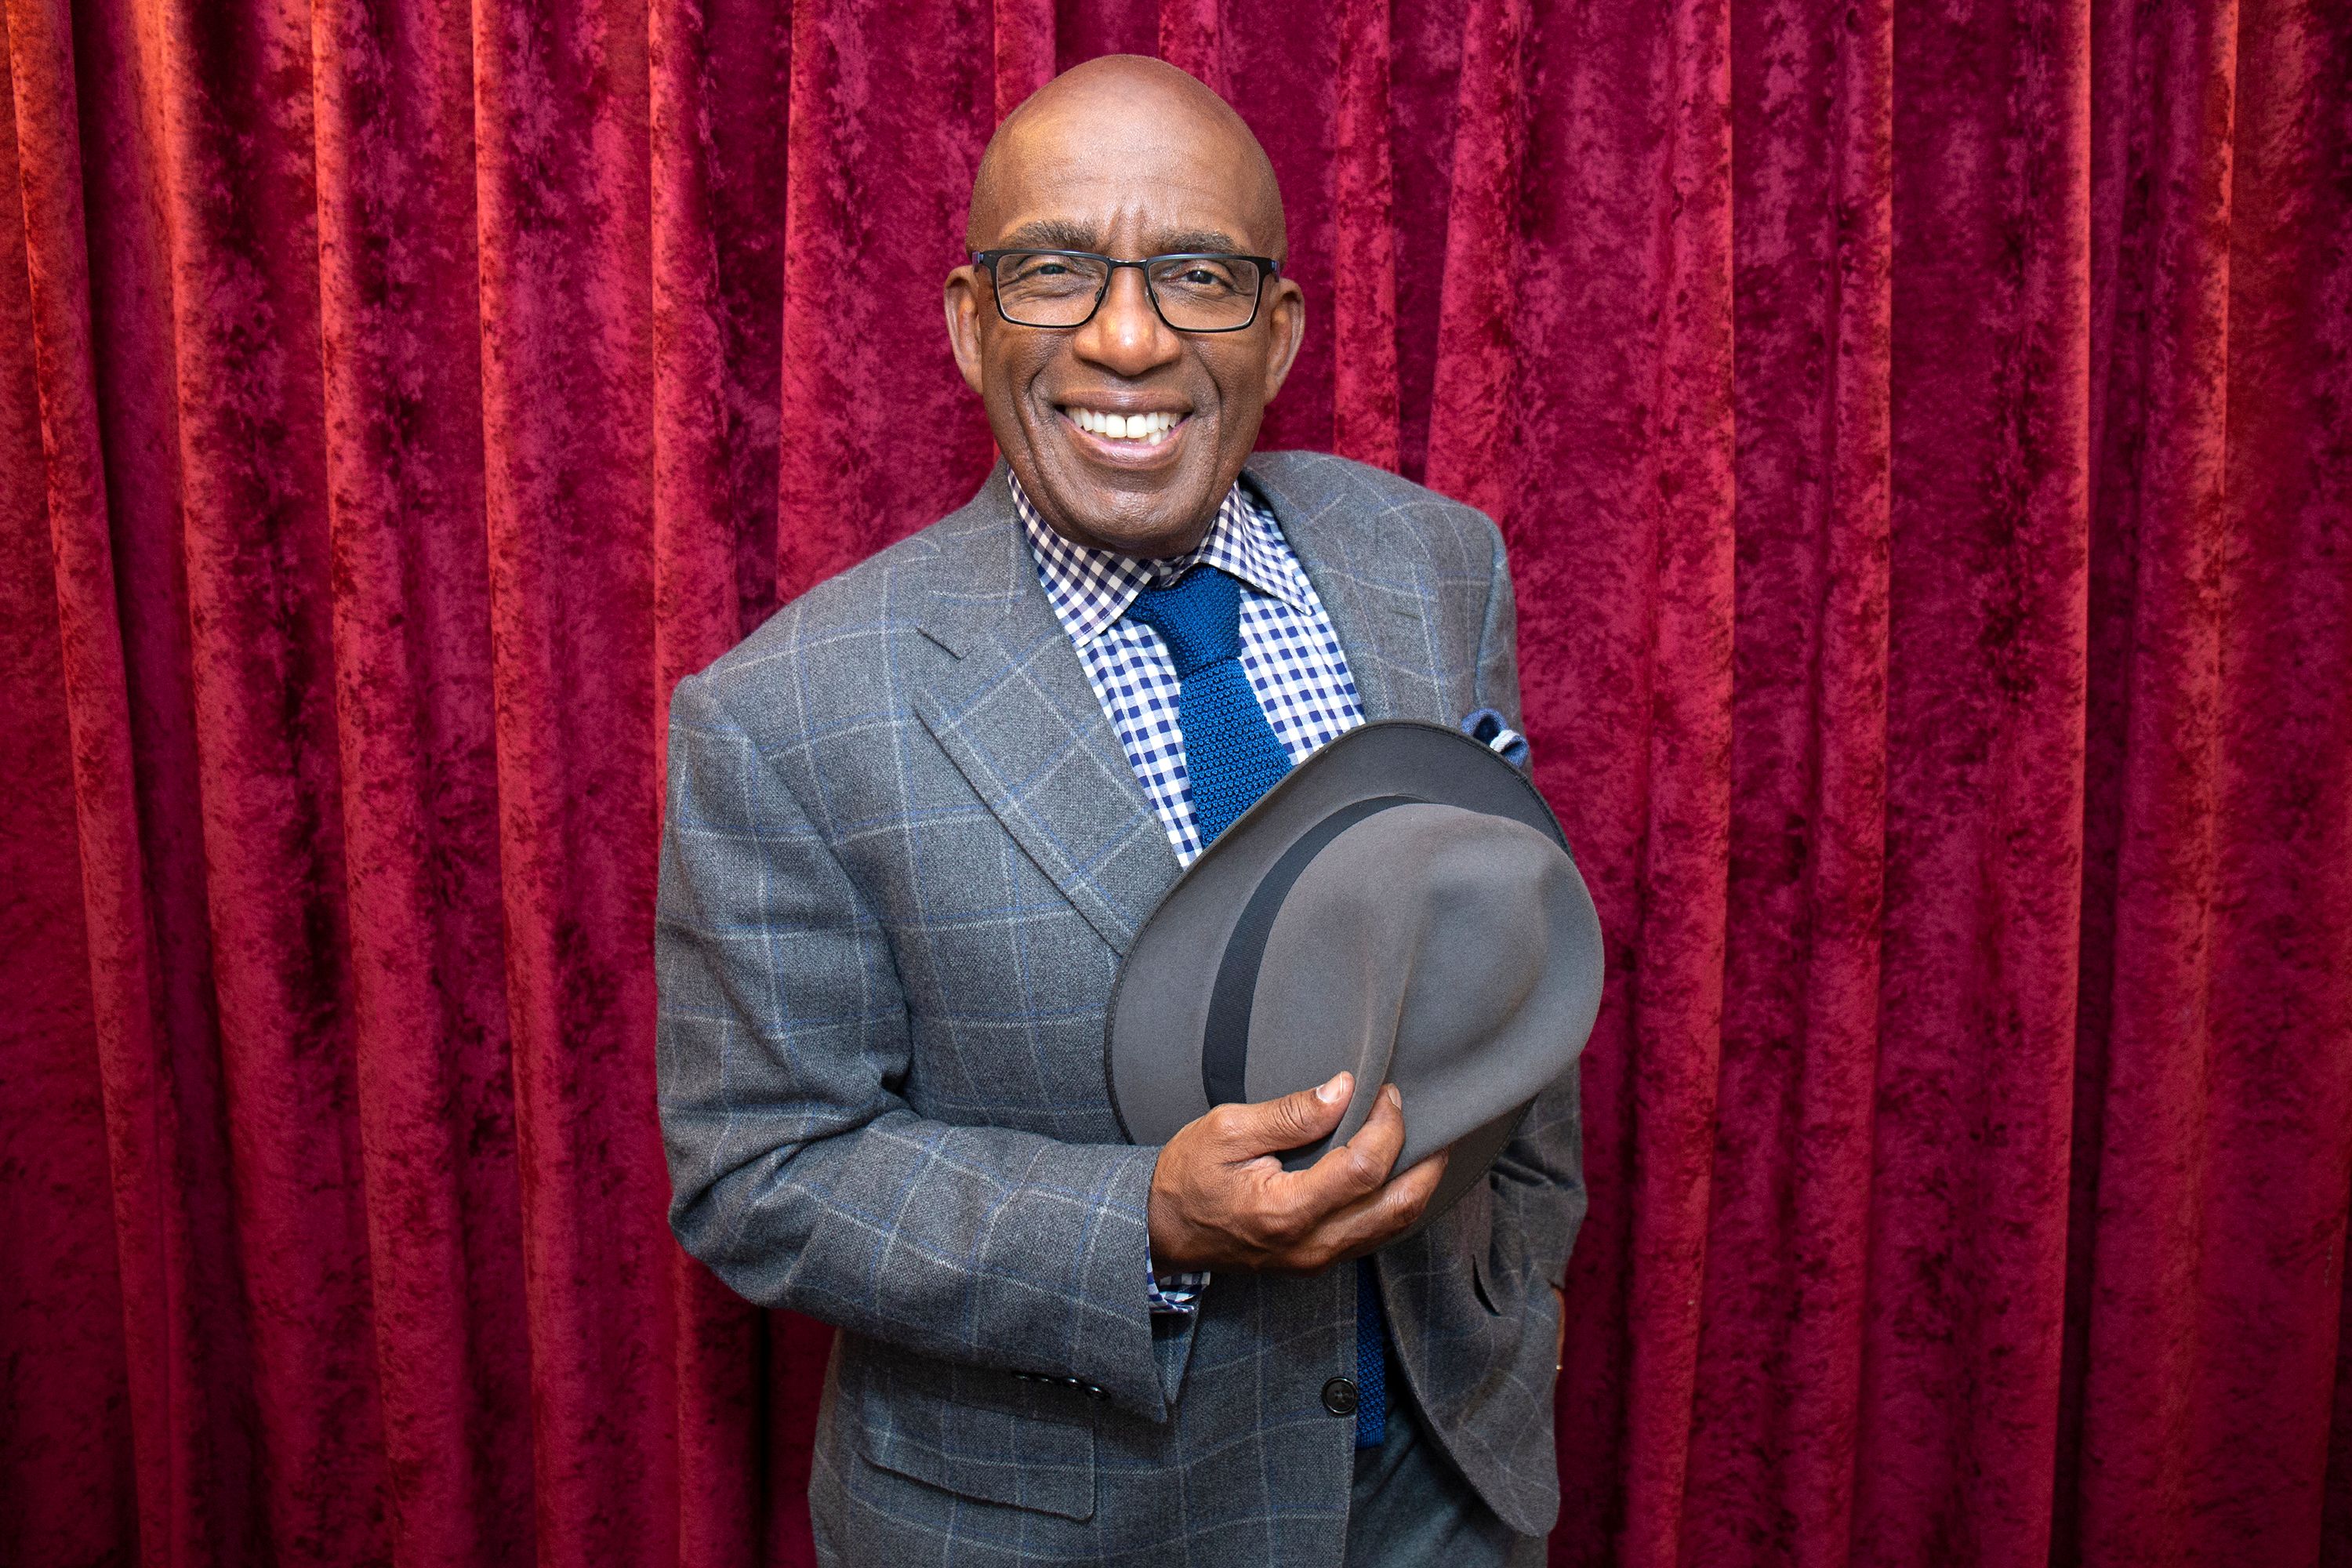 Al Roker at SiriusXM Studios on October 2, 2018 | Photo: Getty Images